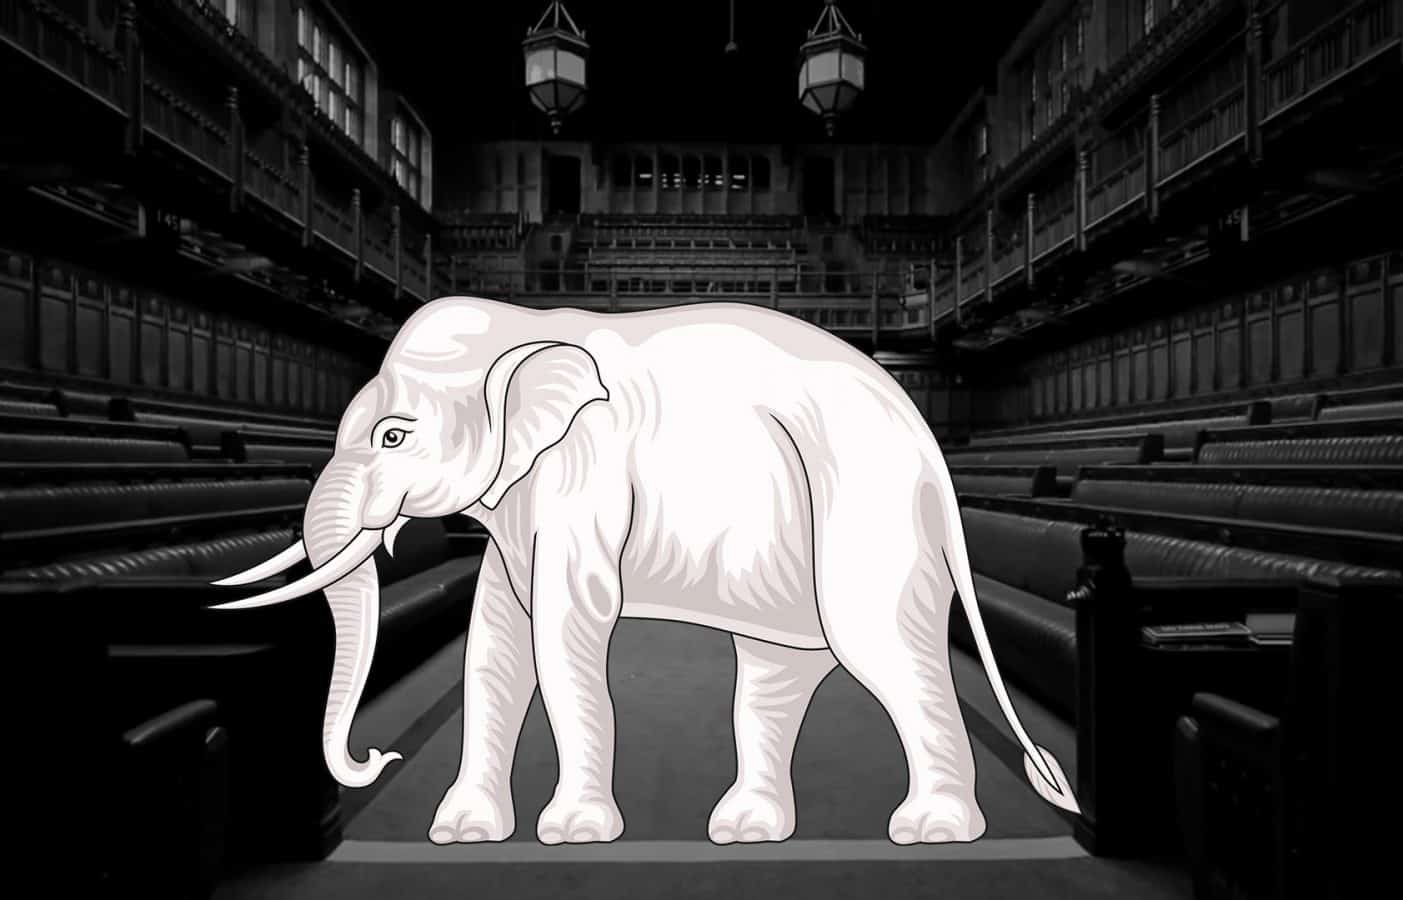 It’s time for May to face up to the white elephant in the room